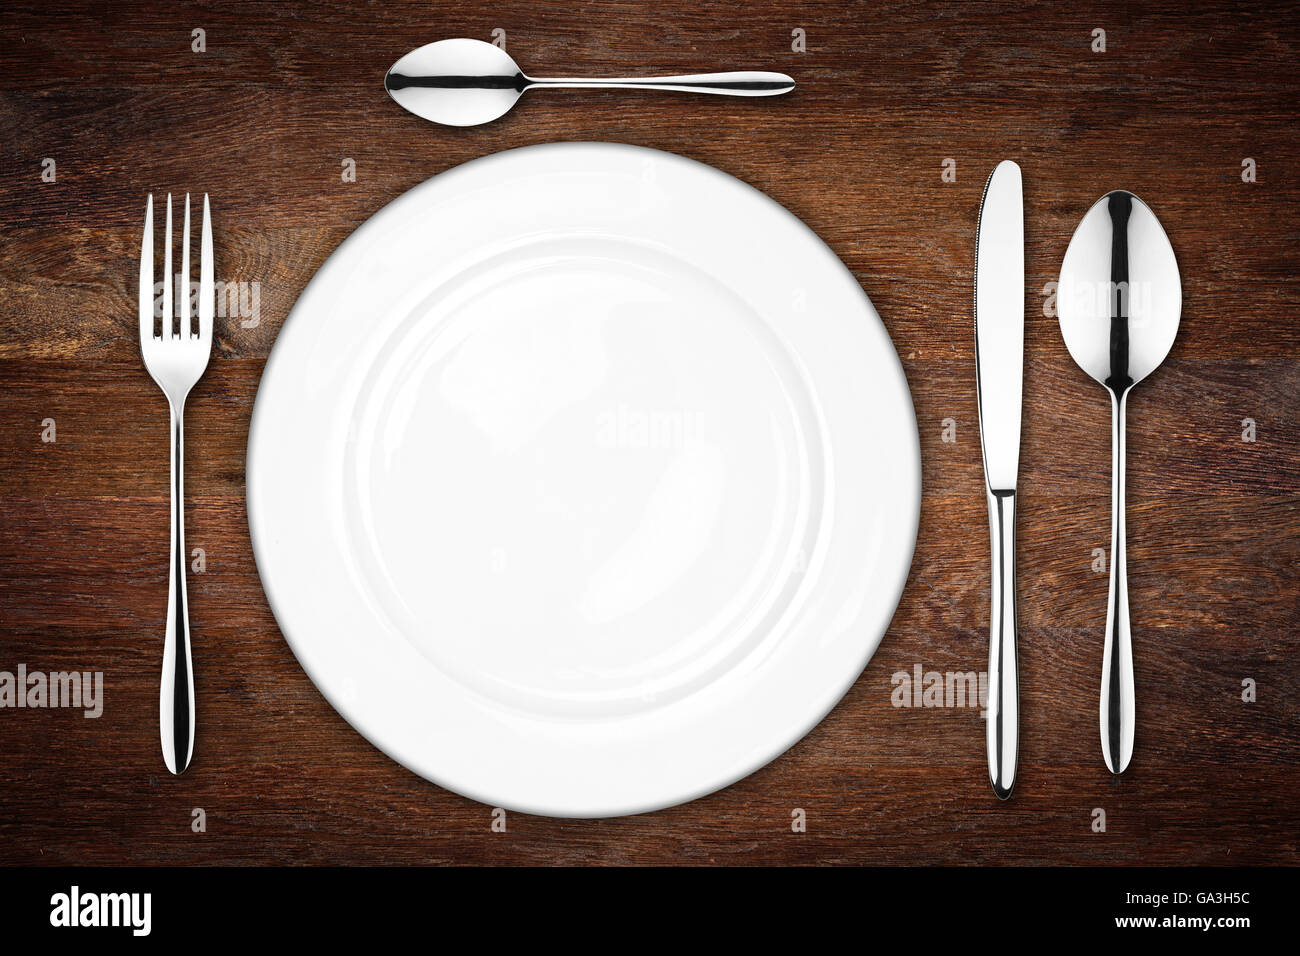 place setting with empty dish fork spoon and knife on wooden background Stock Photo